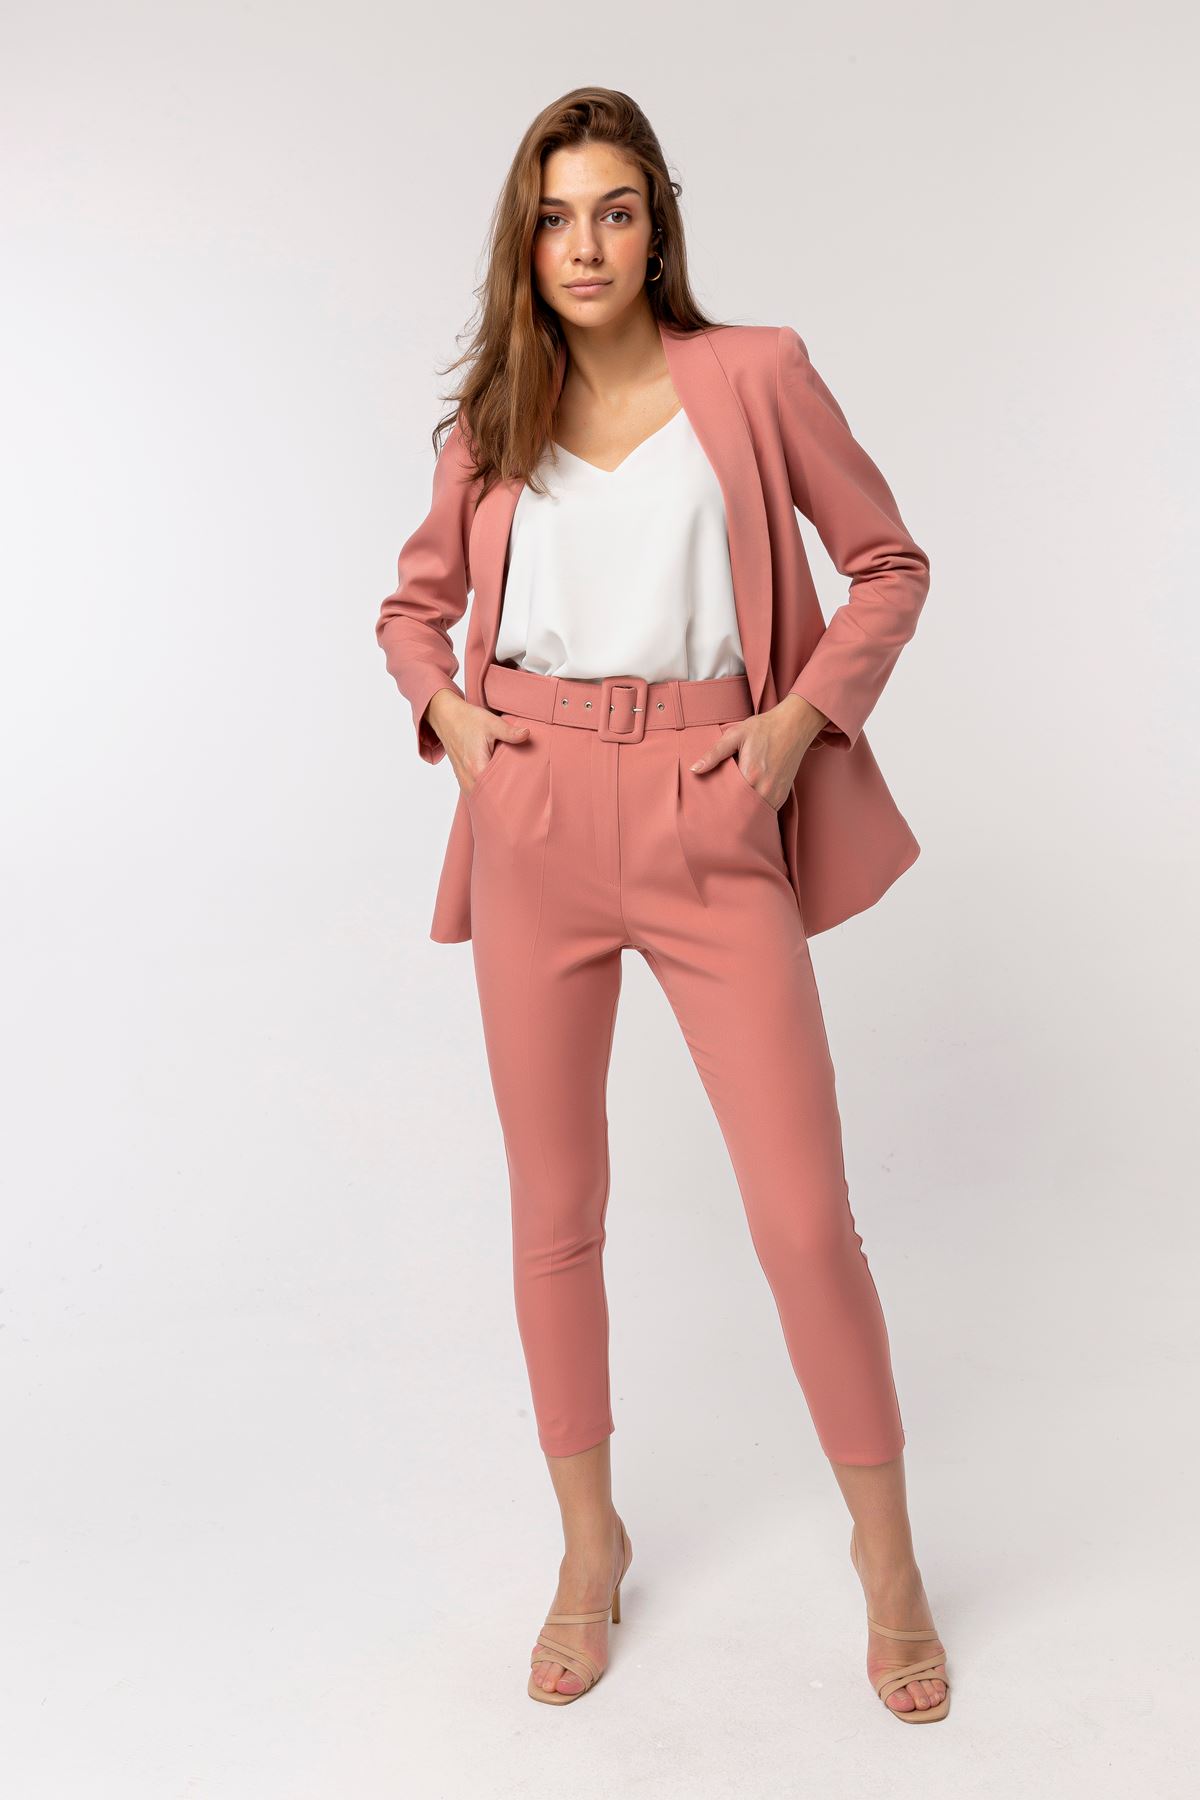 Atlas Fabric Ankle Length Women'S Trouser With Belt - Rose 